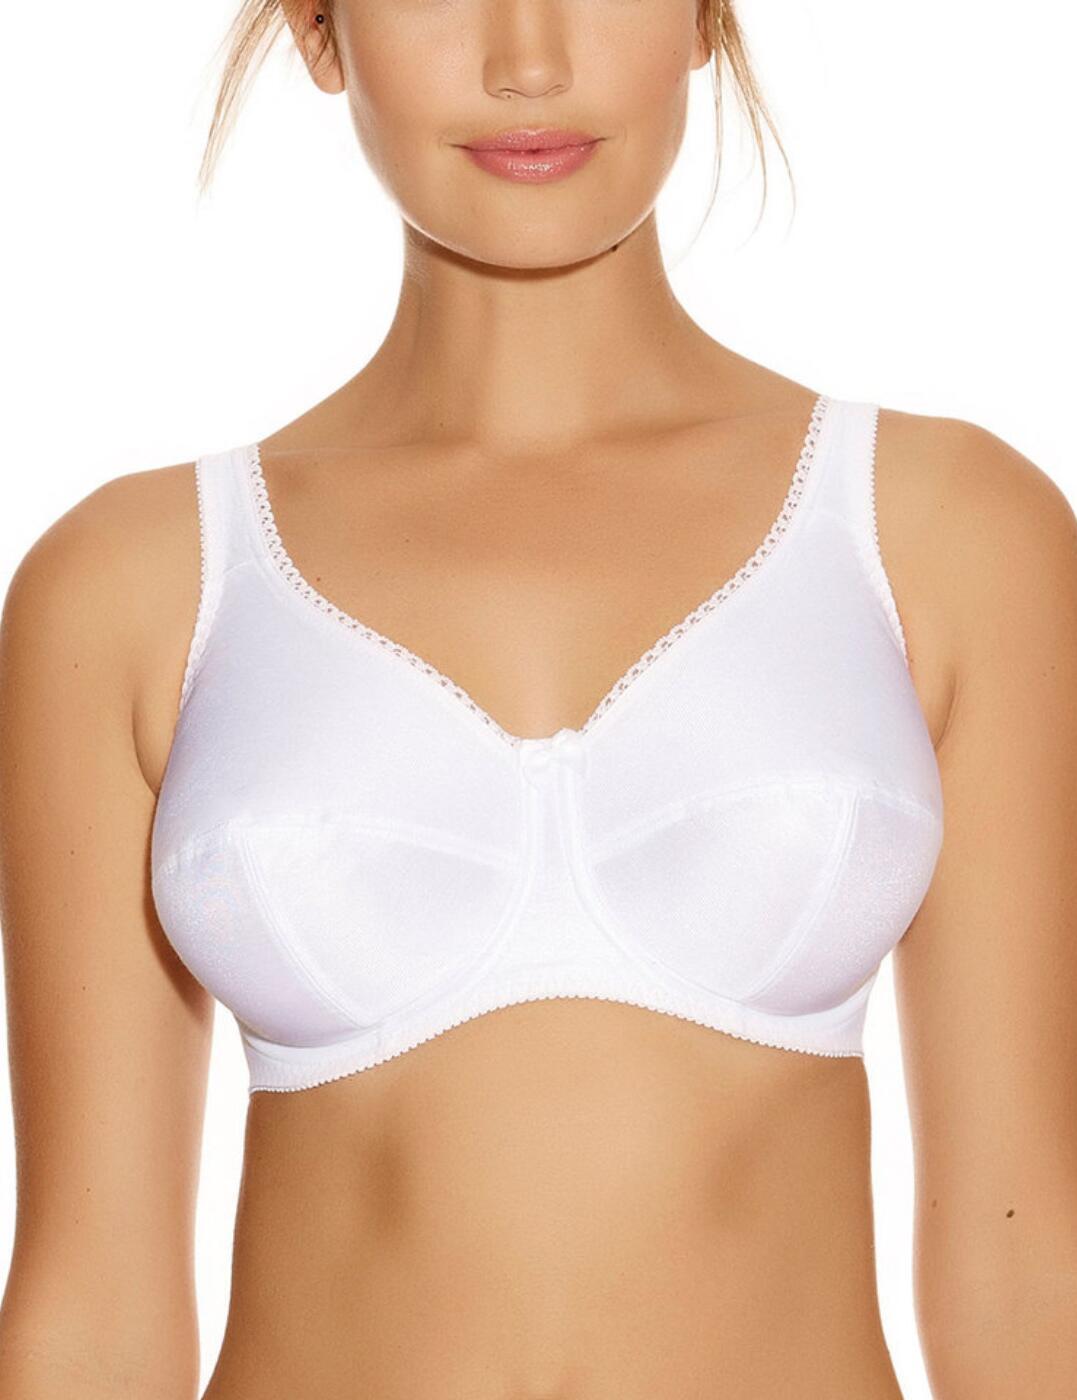 Fantasie Speciality Smooth Cup Bra - White, 34G for sale online